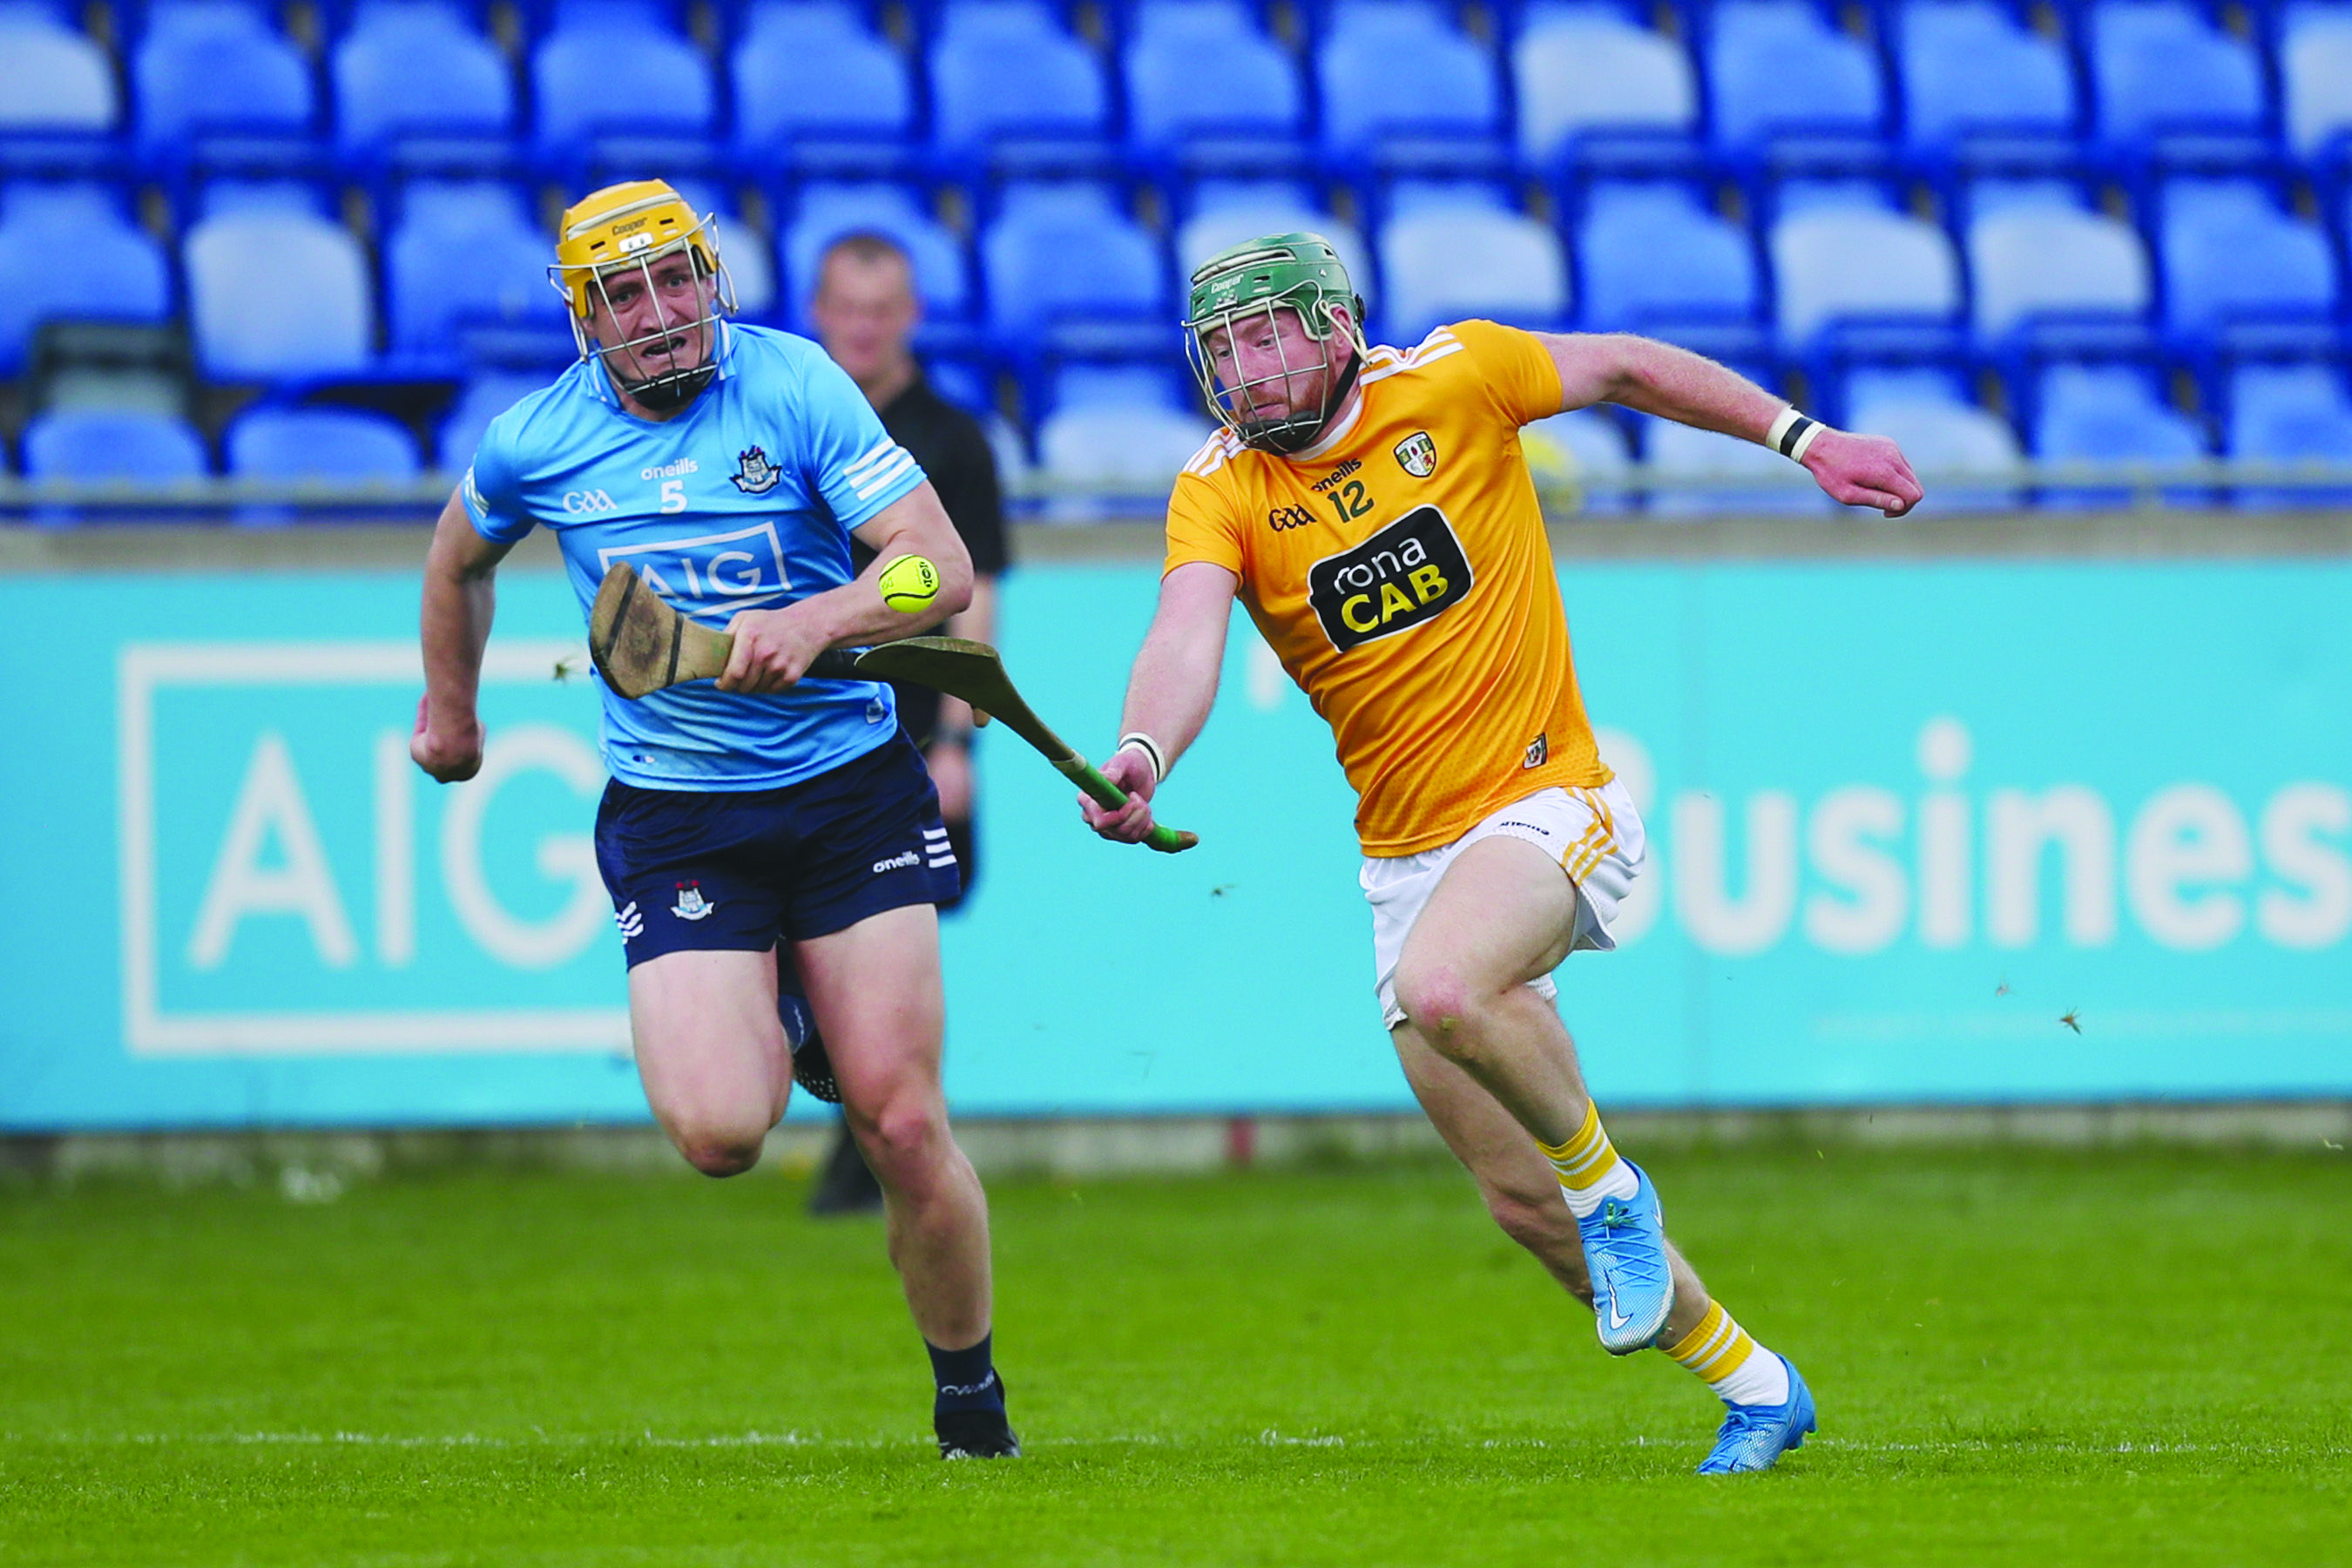 Niall McKenna admits things didn’t click for Antrim in Saturday’s defeat to Dublin but don’t have any concerns about facing the same opposition in the Leinster Championship at the end of June